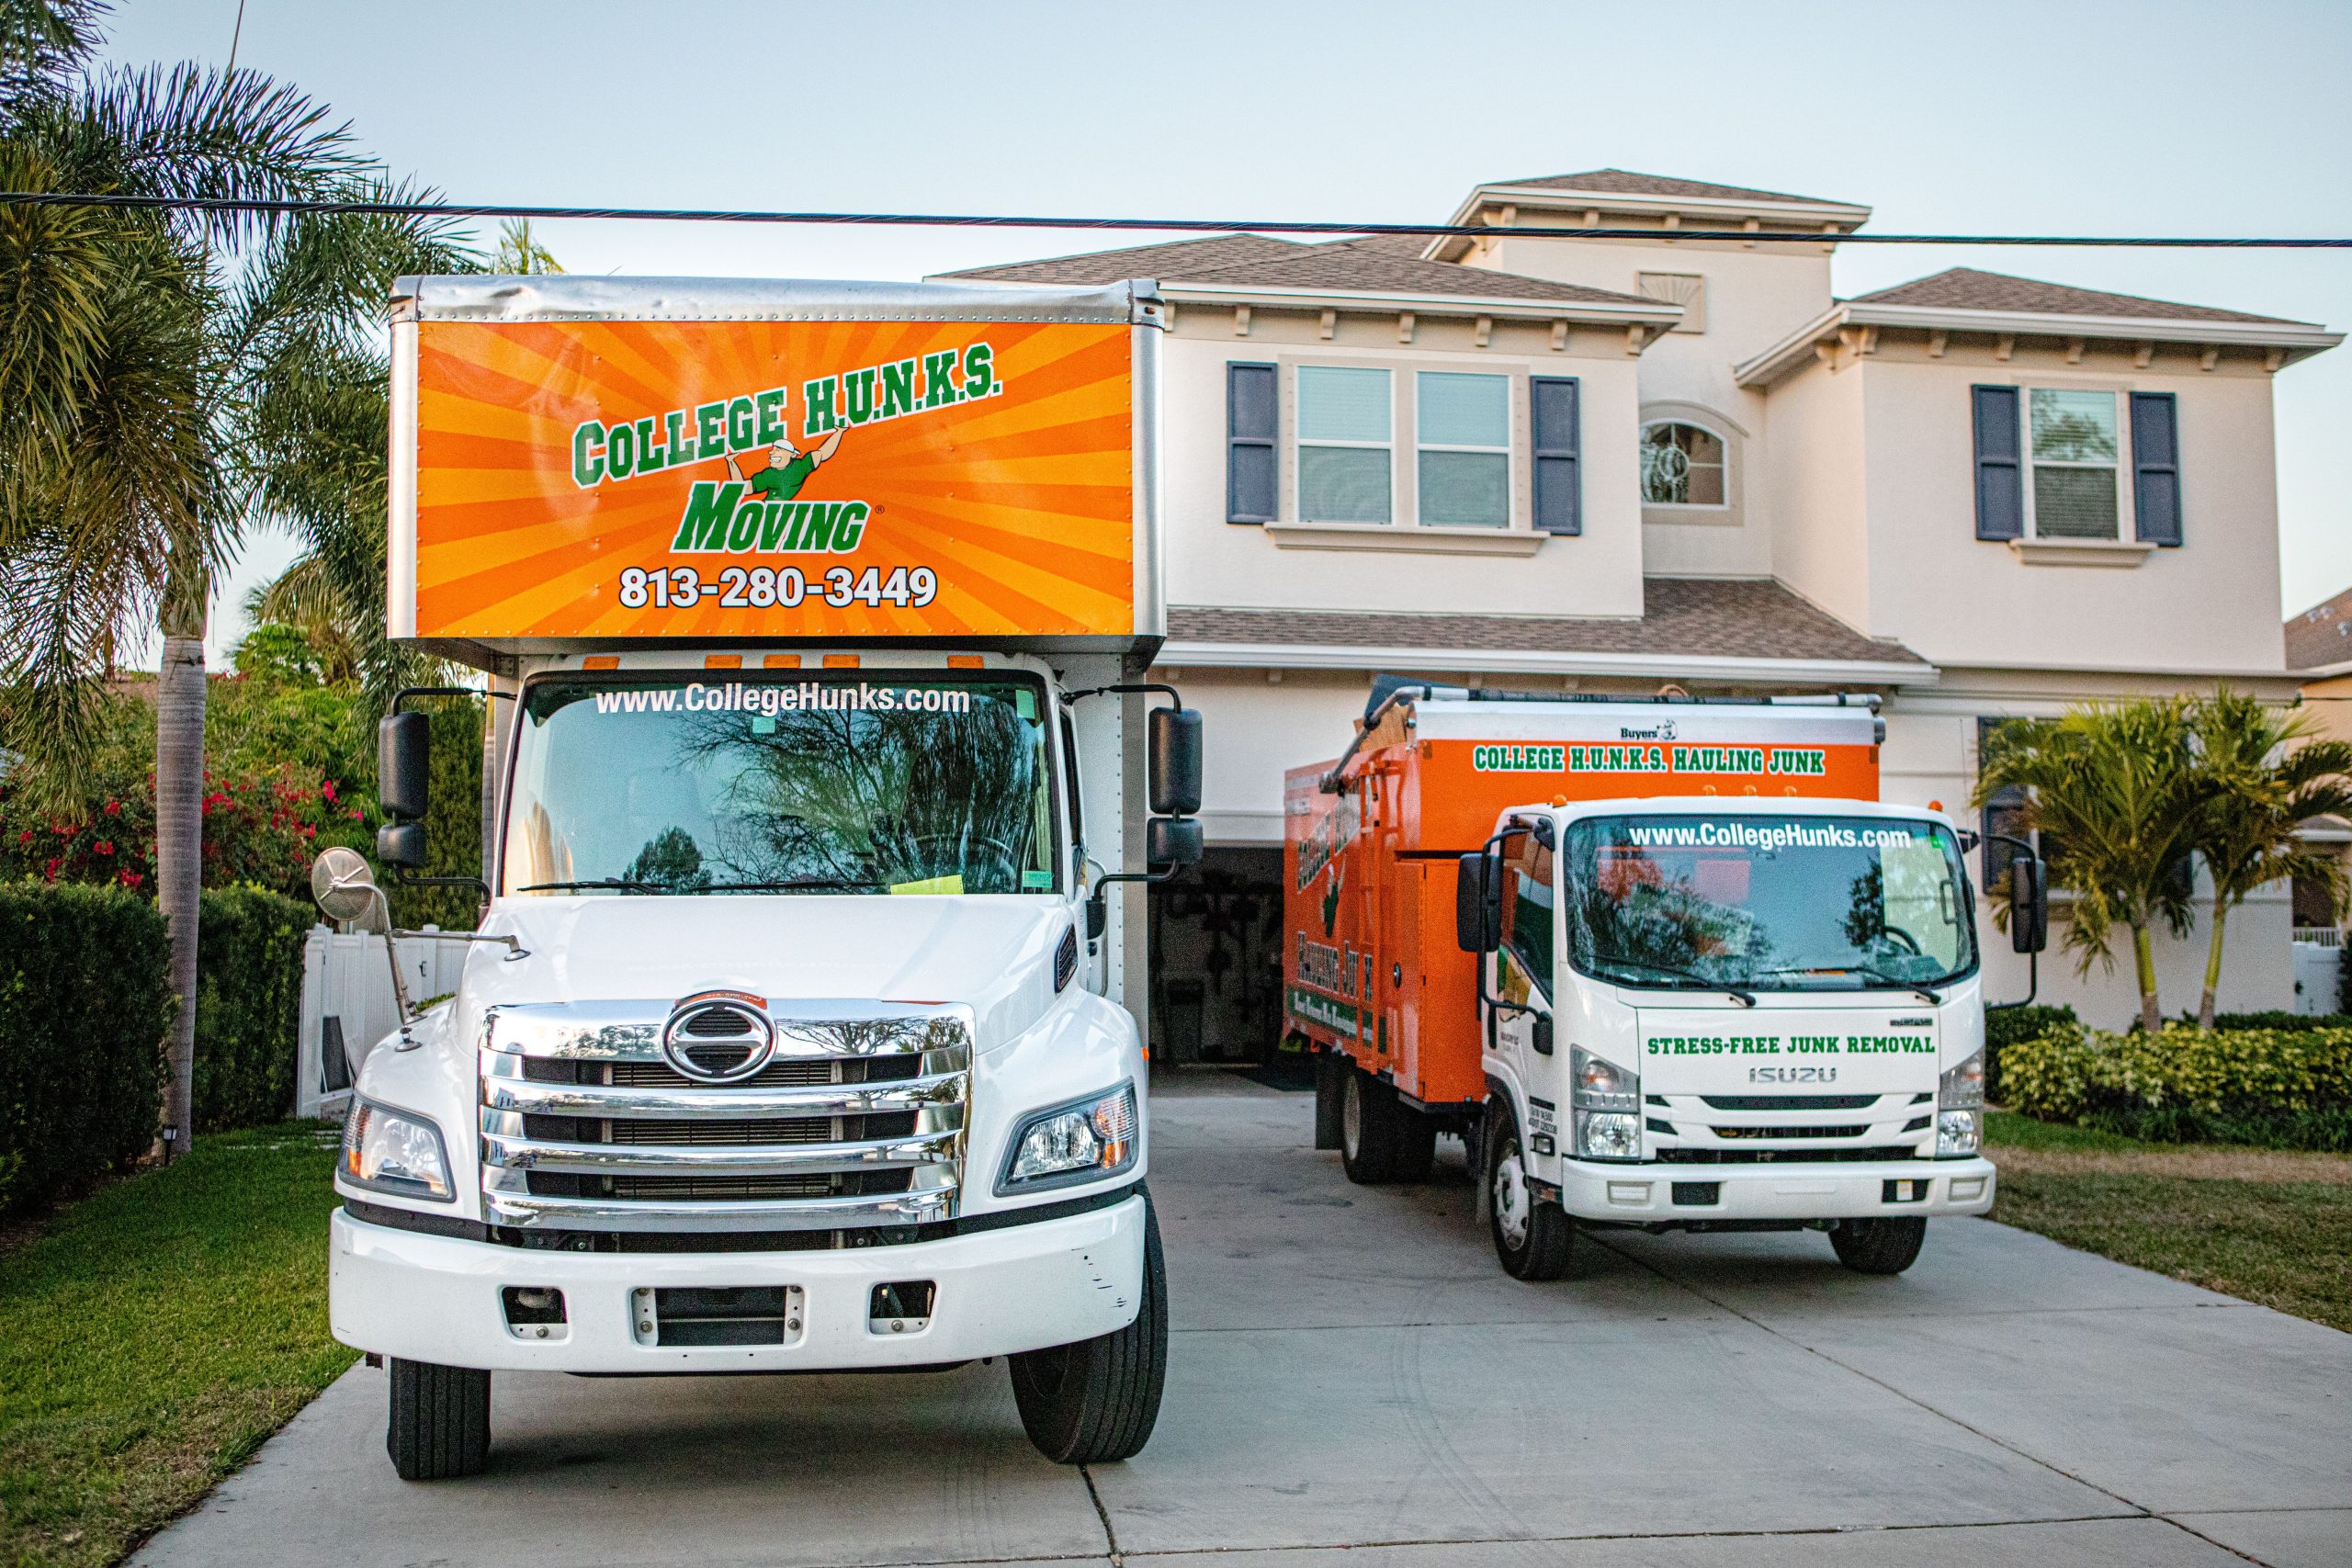 2 junk removal franchise trucks parked in a driveway